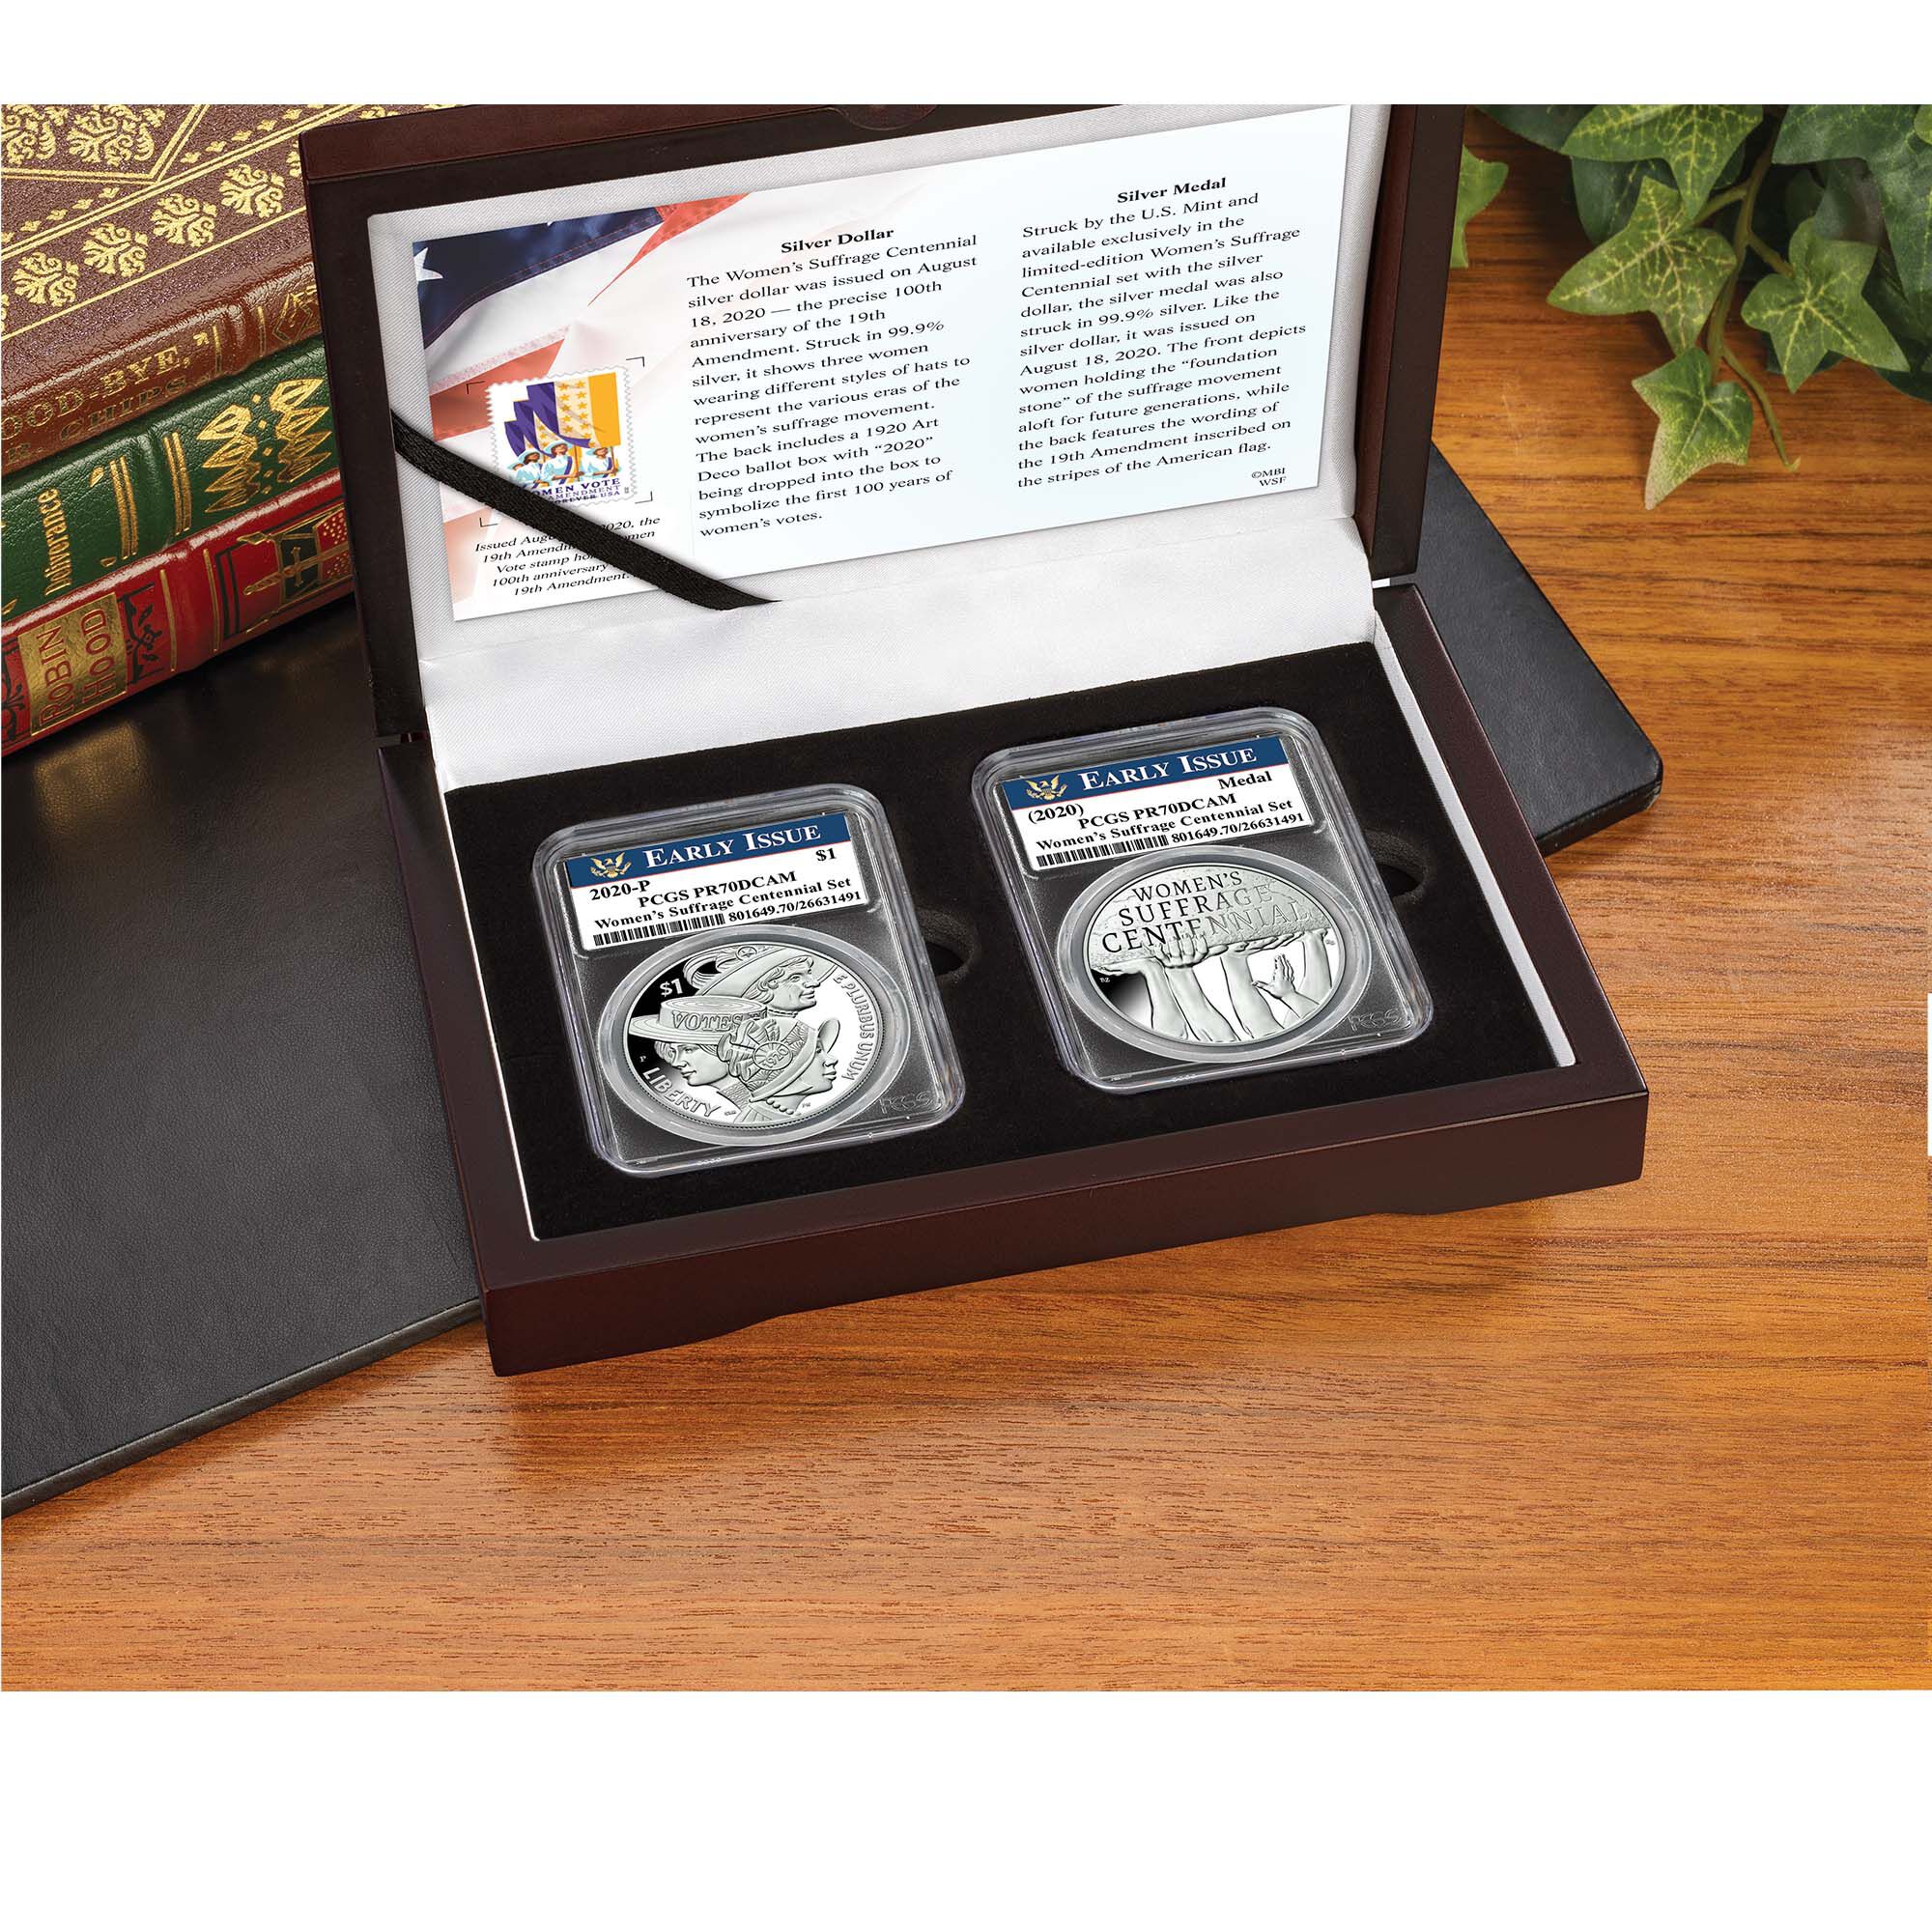 The Women's Suffrage Centennial Proof Silver Dollar and Medal Set